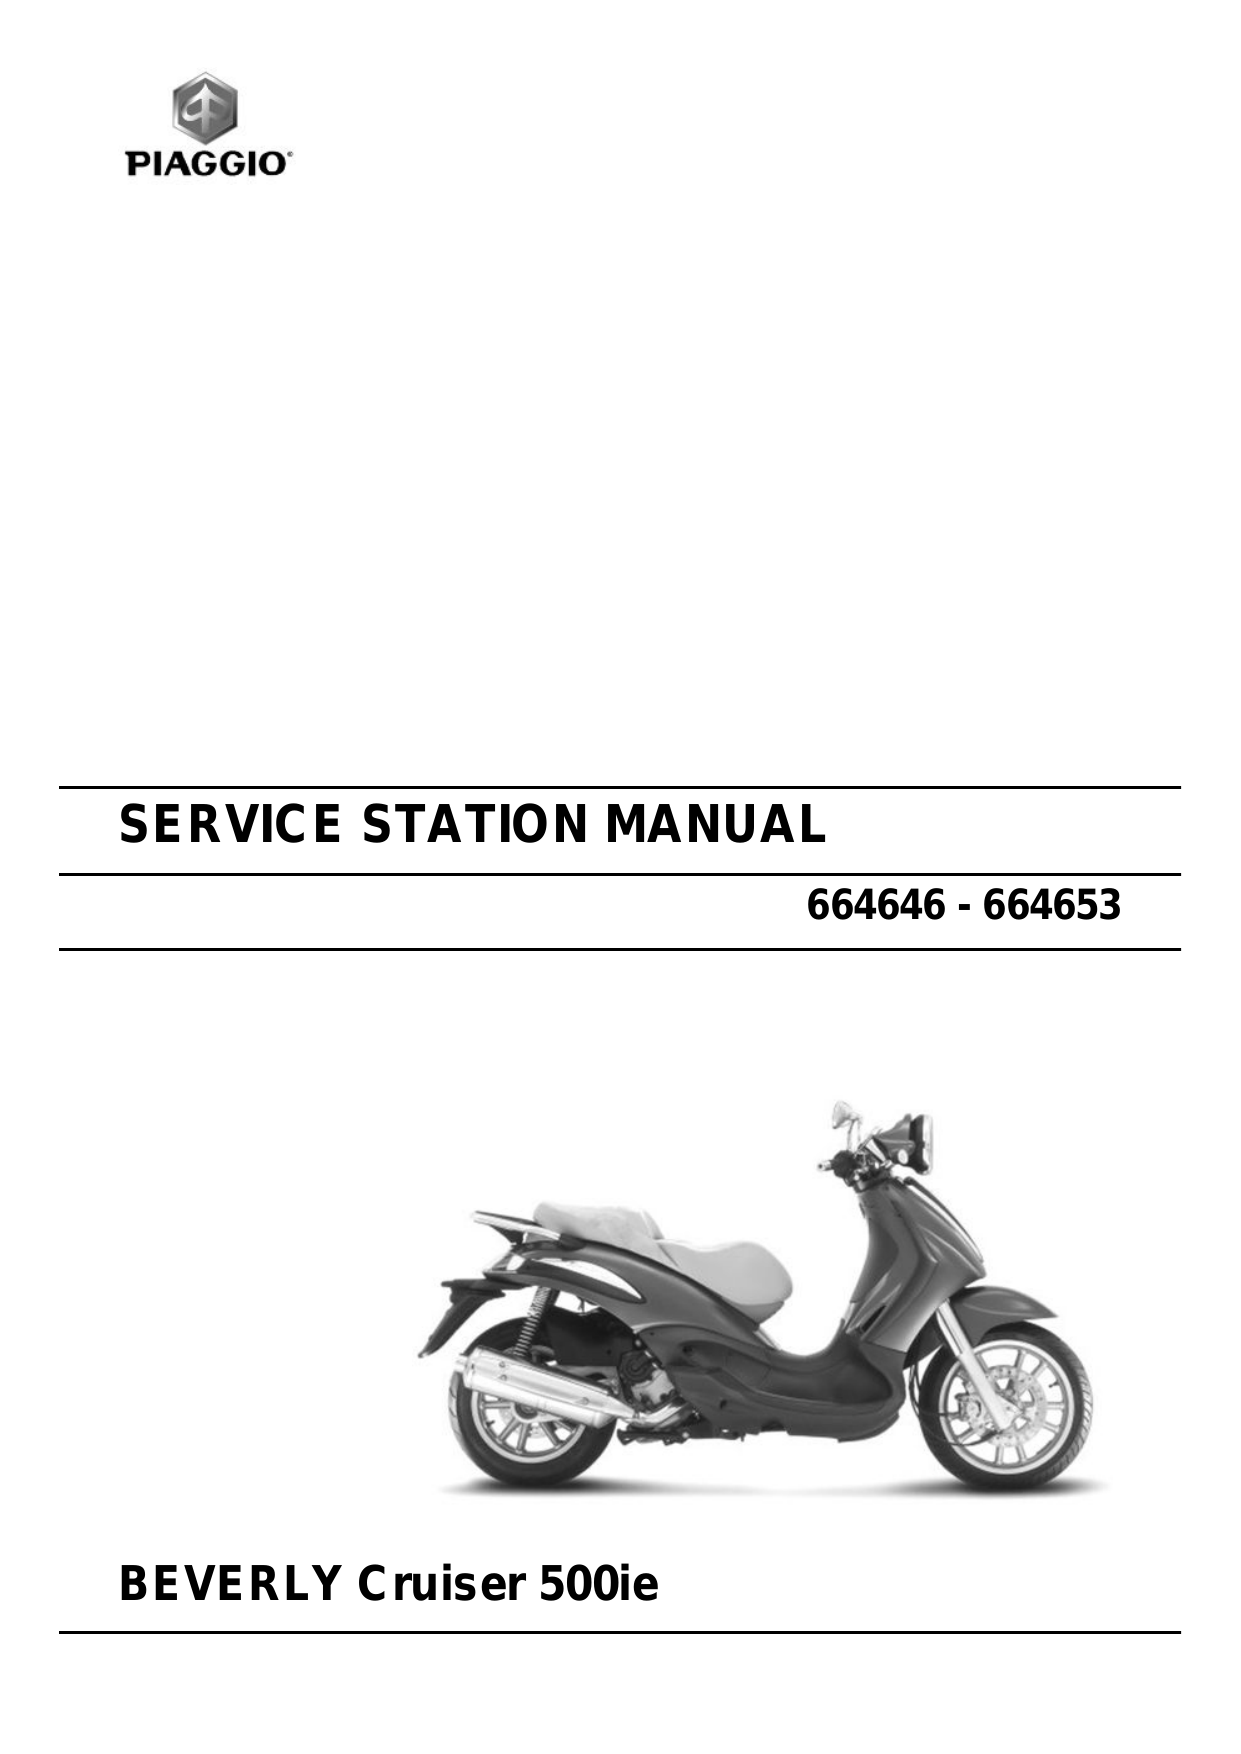 Piaggio Beverly Cruiser 500, 500ie ie scooter manual Preview image 1